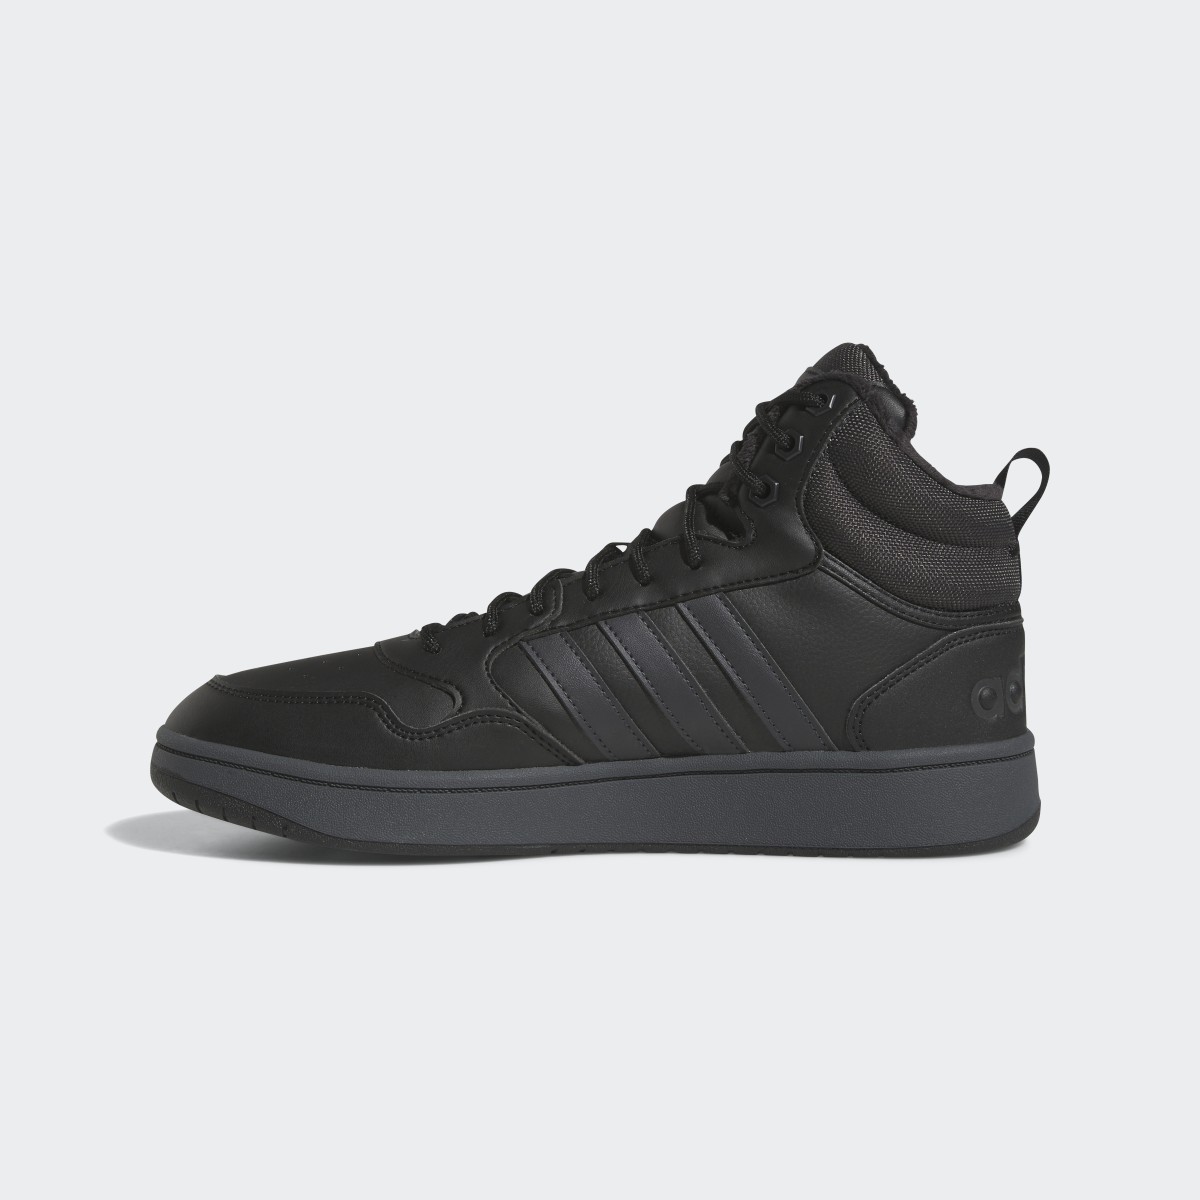 Adidas Hoops 3.0 Mid Lifestyle Basketball Classic Fur Lining Winterized Schuh. 7